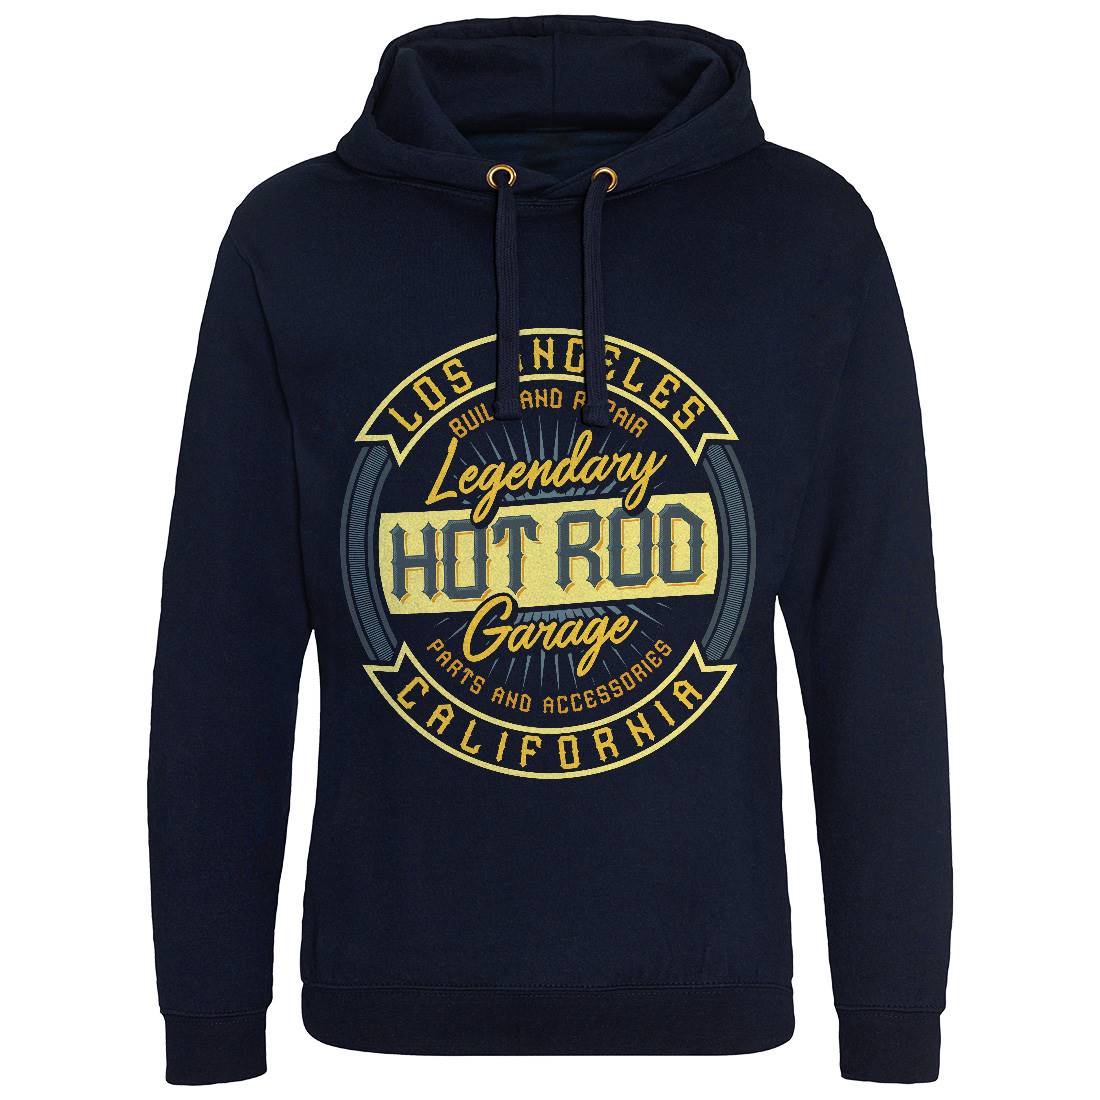 Hot Rod Mens Hoodie Without Pocket Cars B306